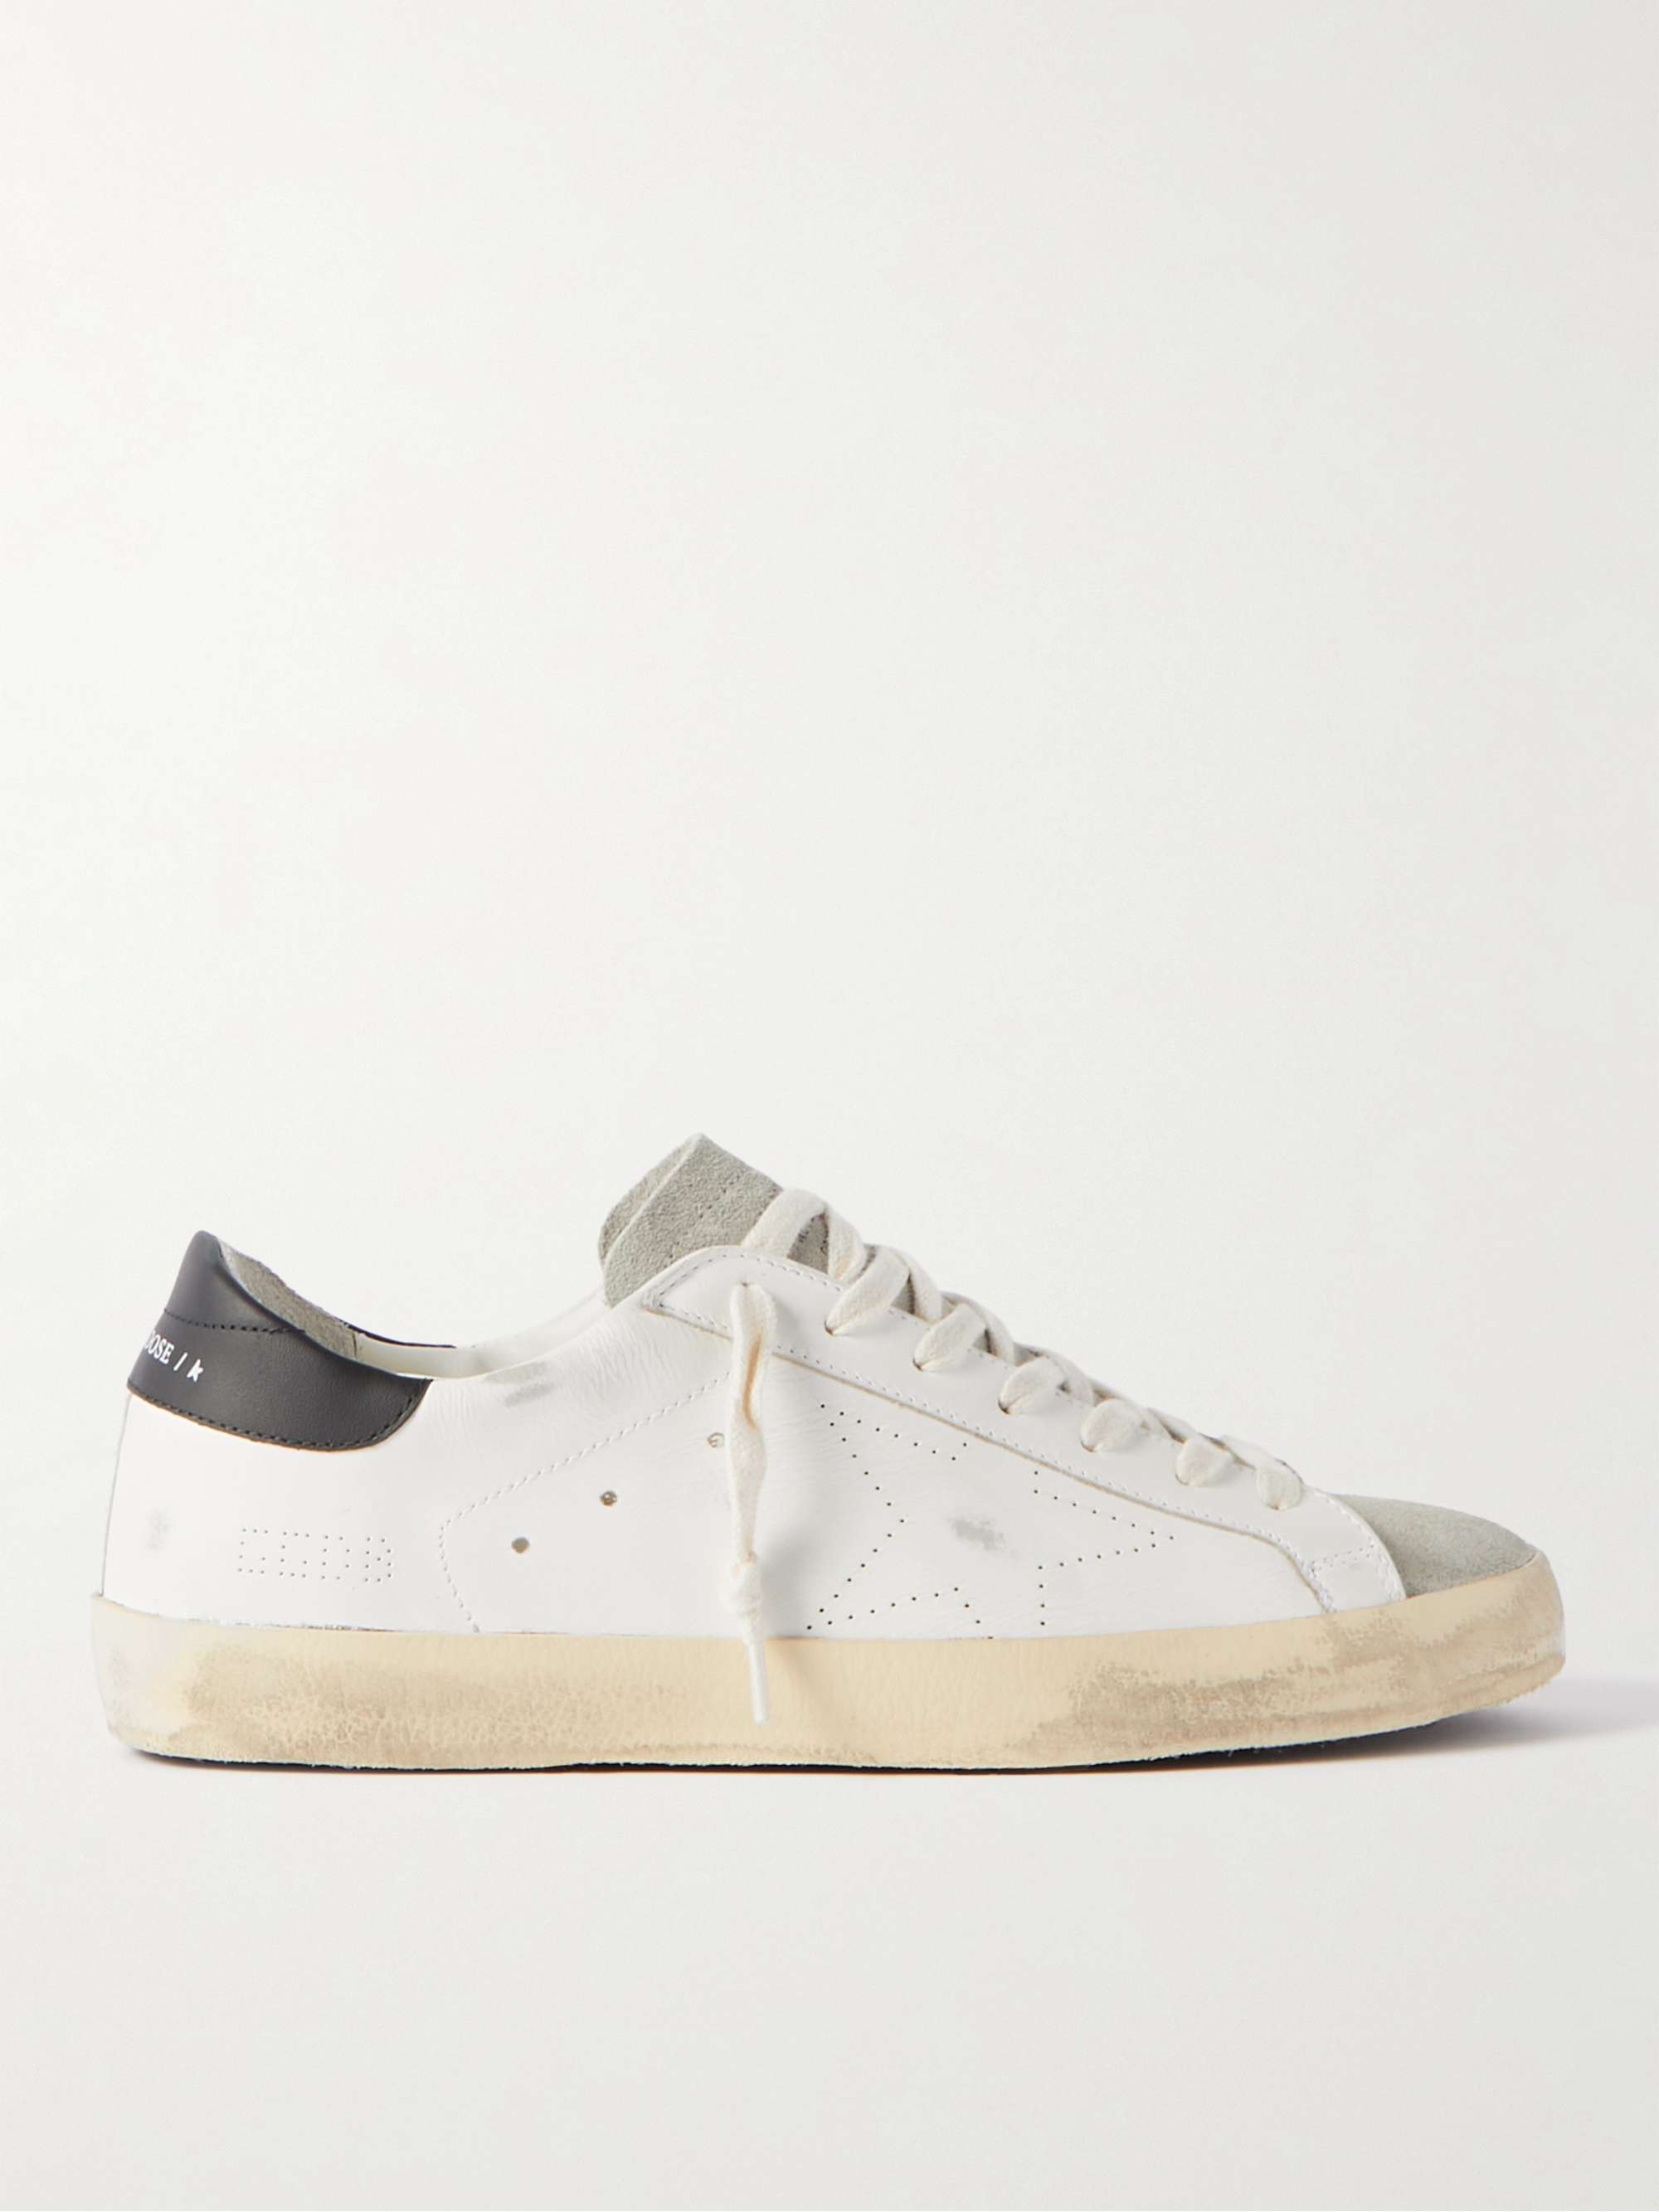 GOLDEN GOOSE Superstar Distressed Leather and Suede Sneakers for Men | MR  PORTER